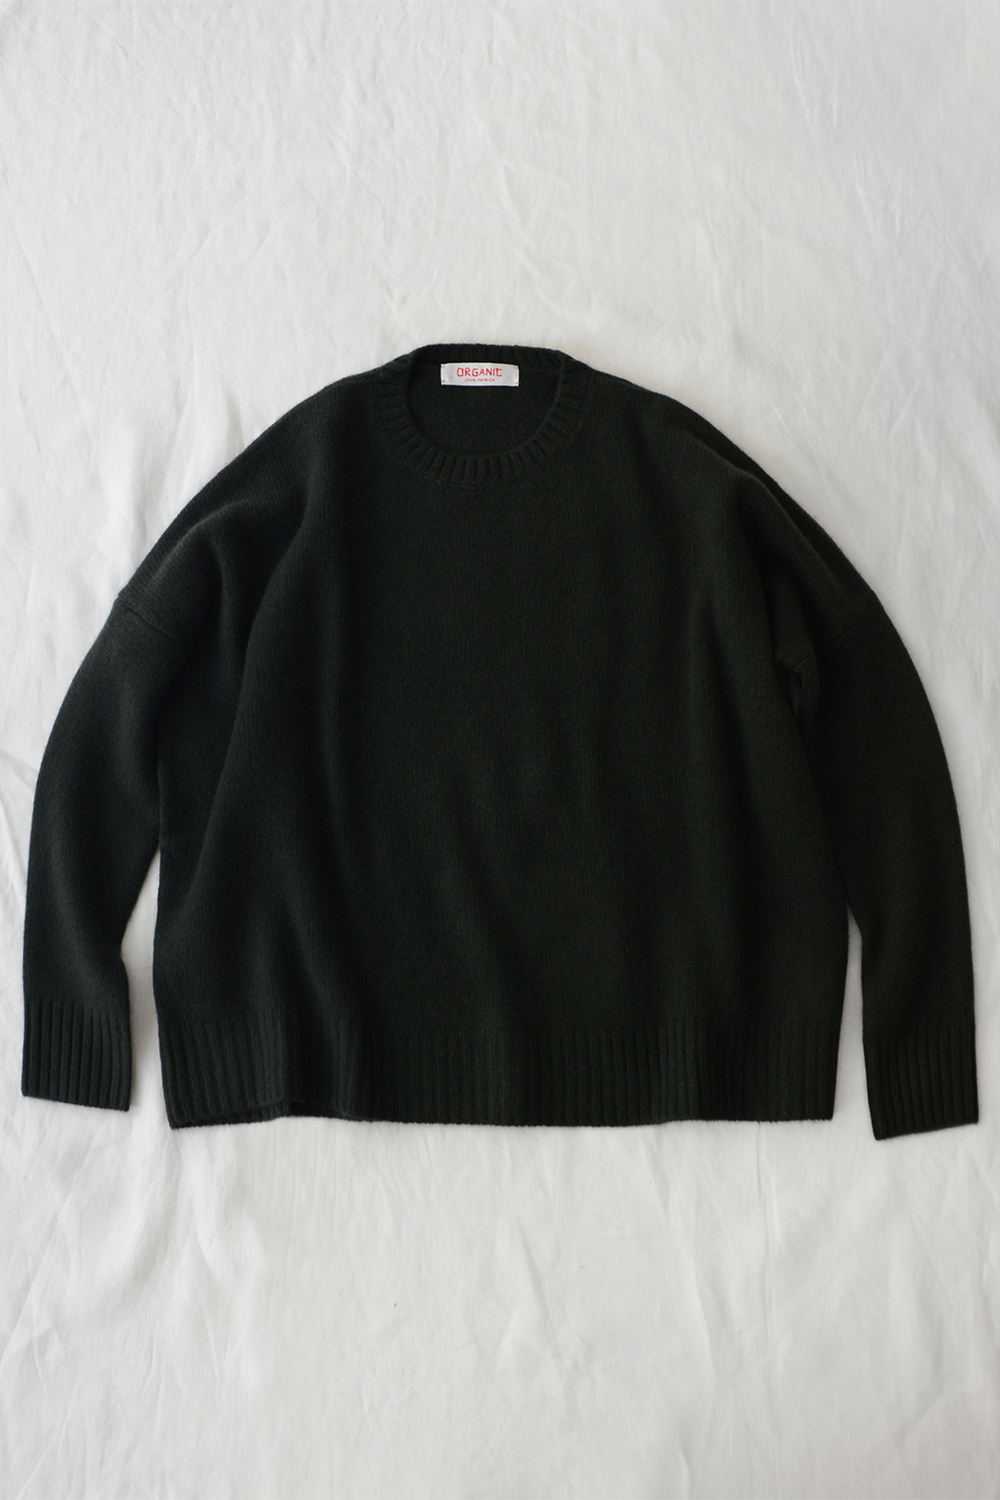 Organic by John Patrick Cashmere Sweater a Top Picture